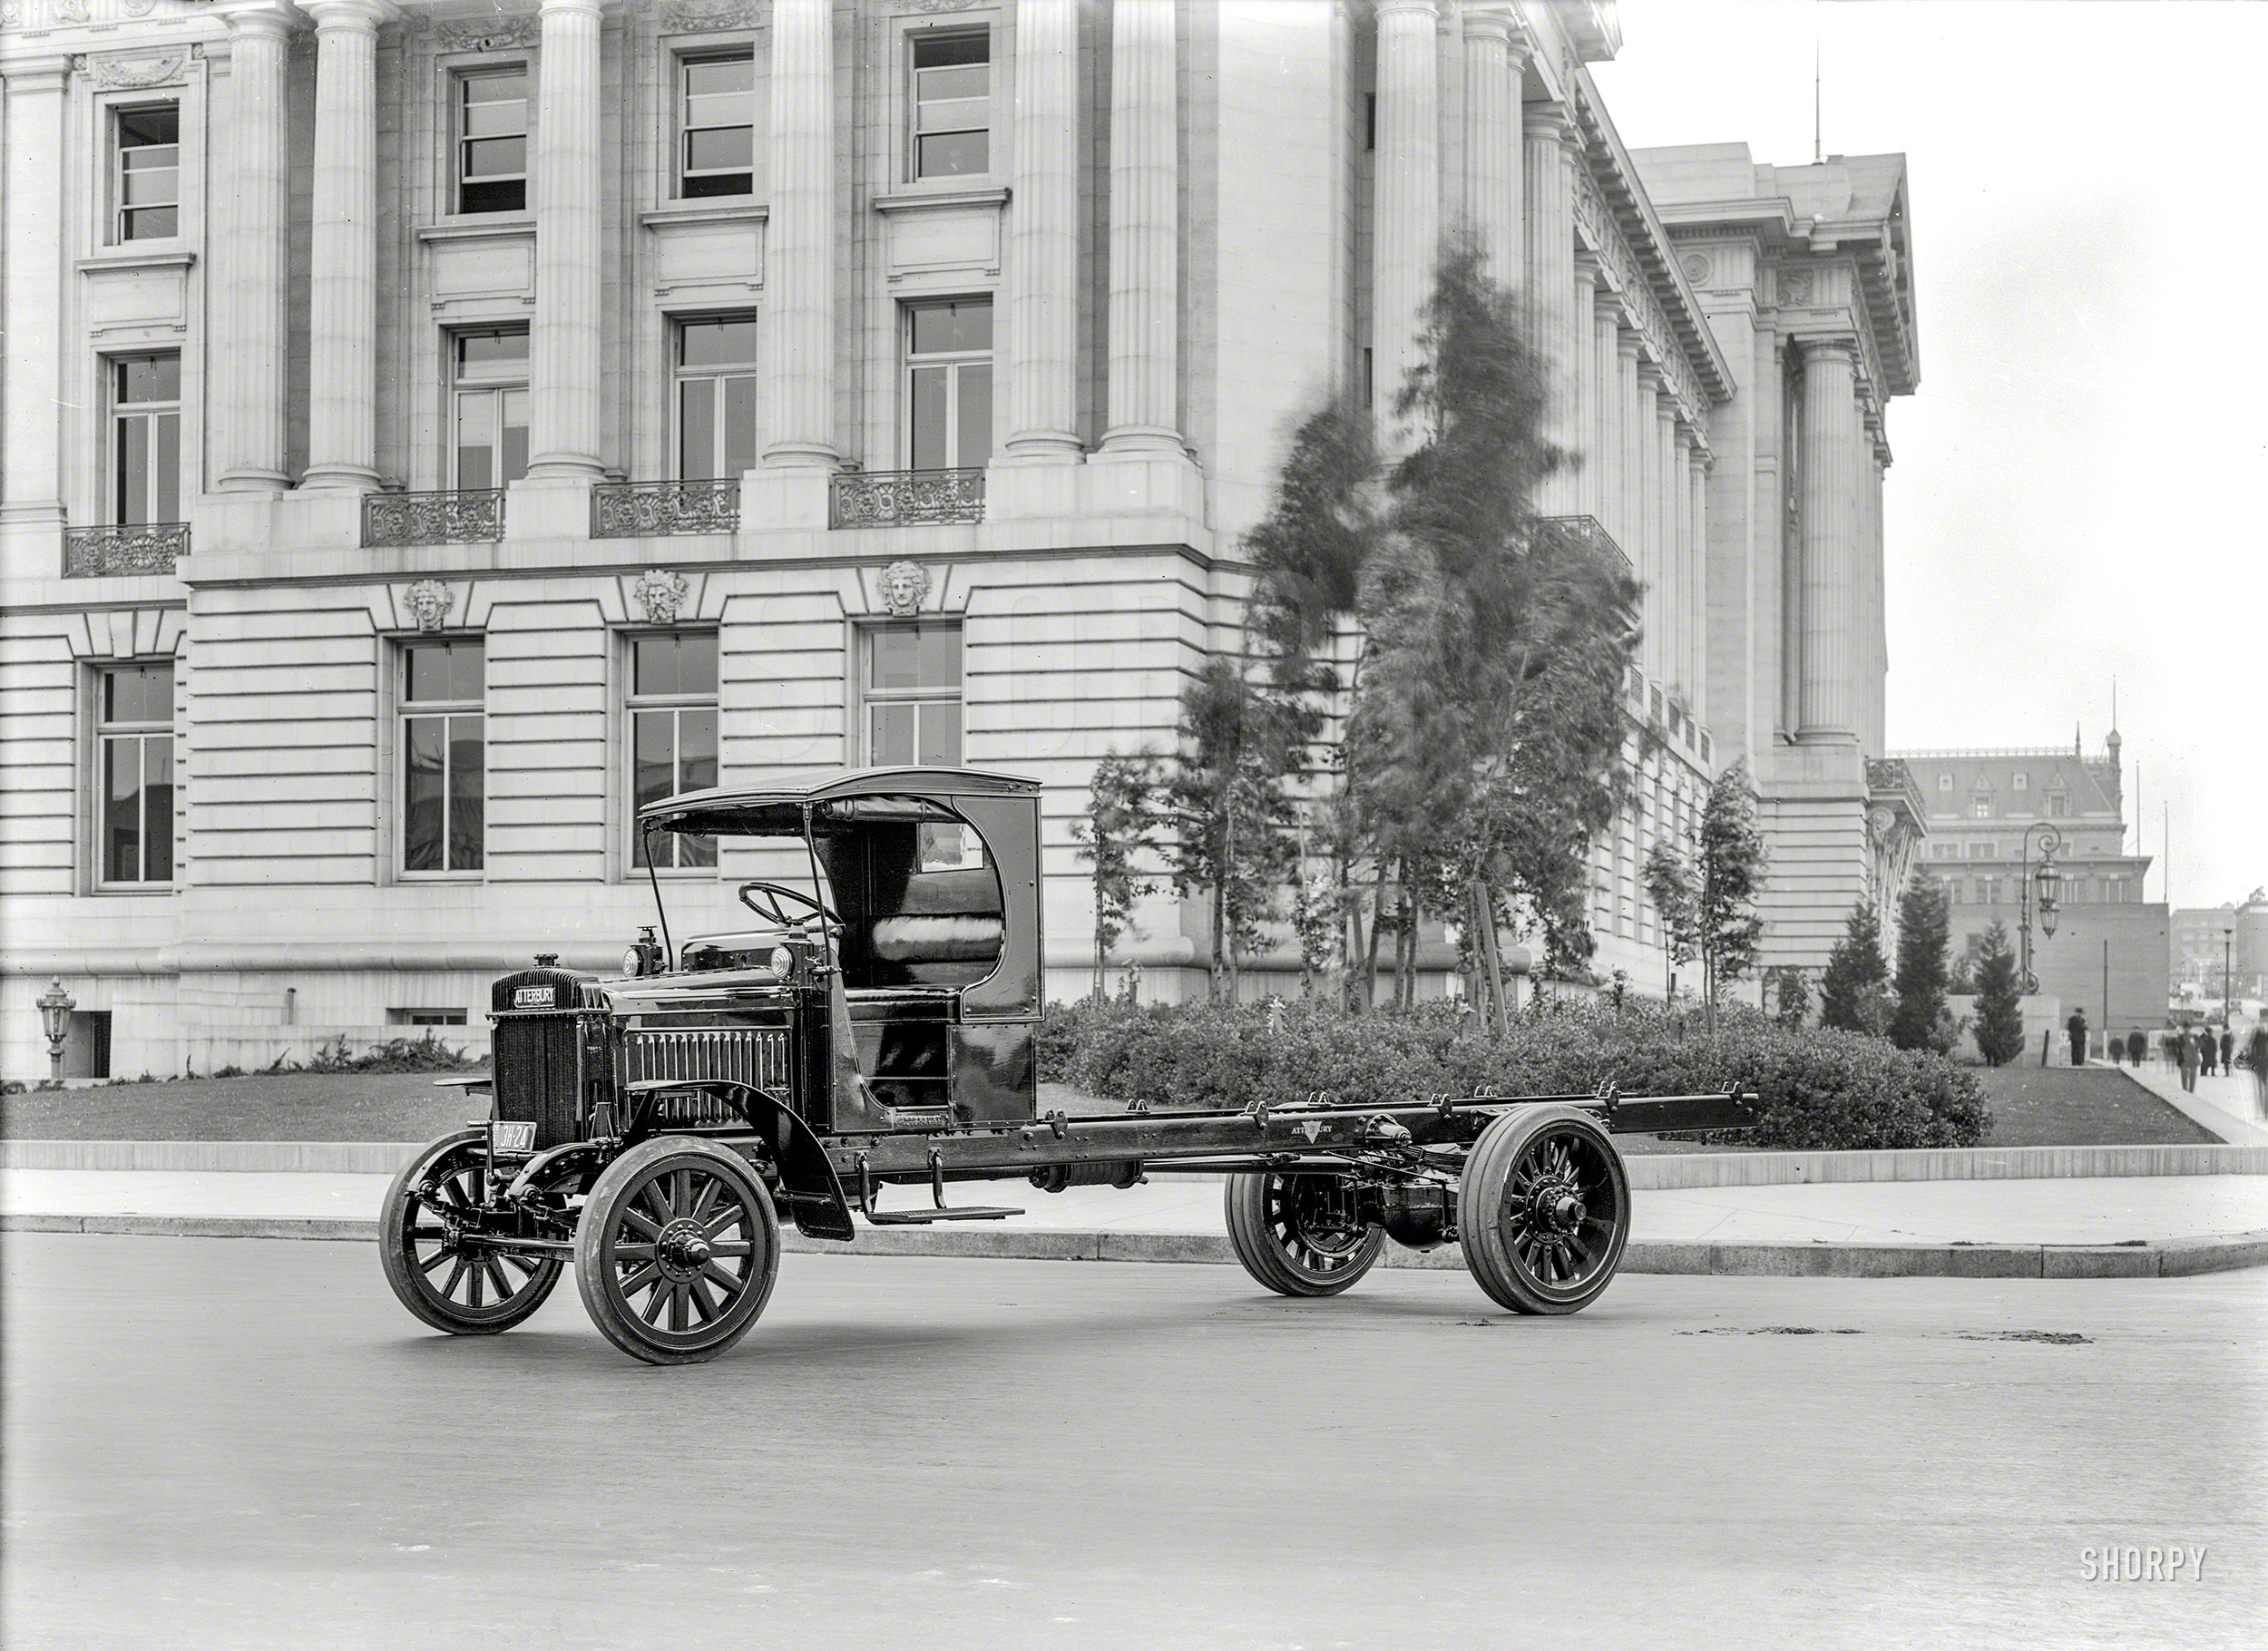 San Francisco, 1920. "Atterbury truck at City Hall." Looking somewhat skeletal if you ask us. 5x7 glass negative by Christopher Helin. View full size.